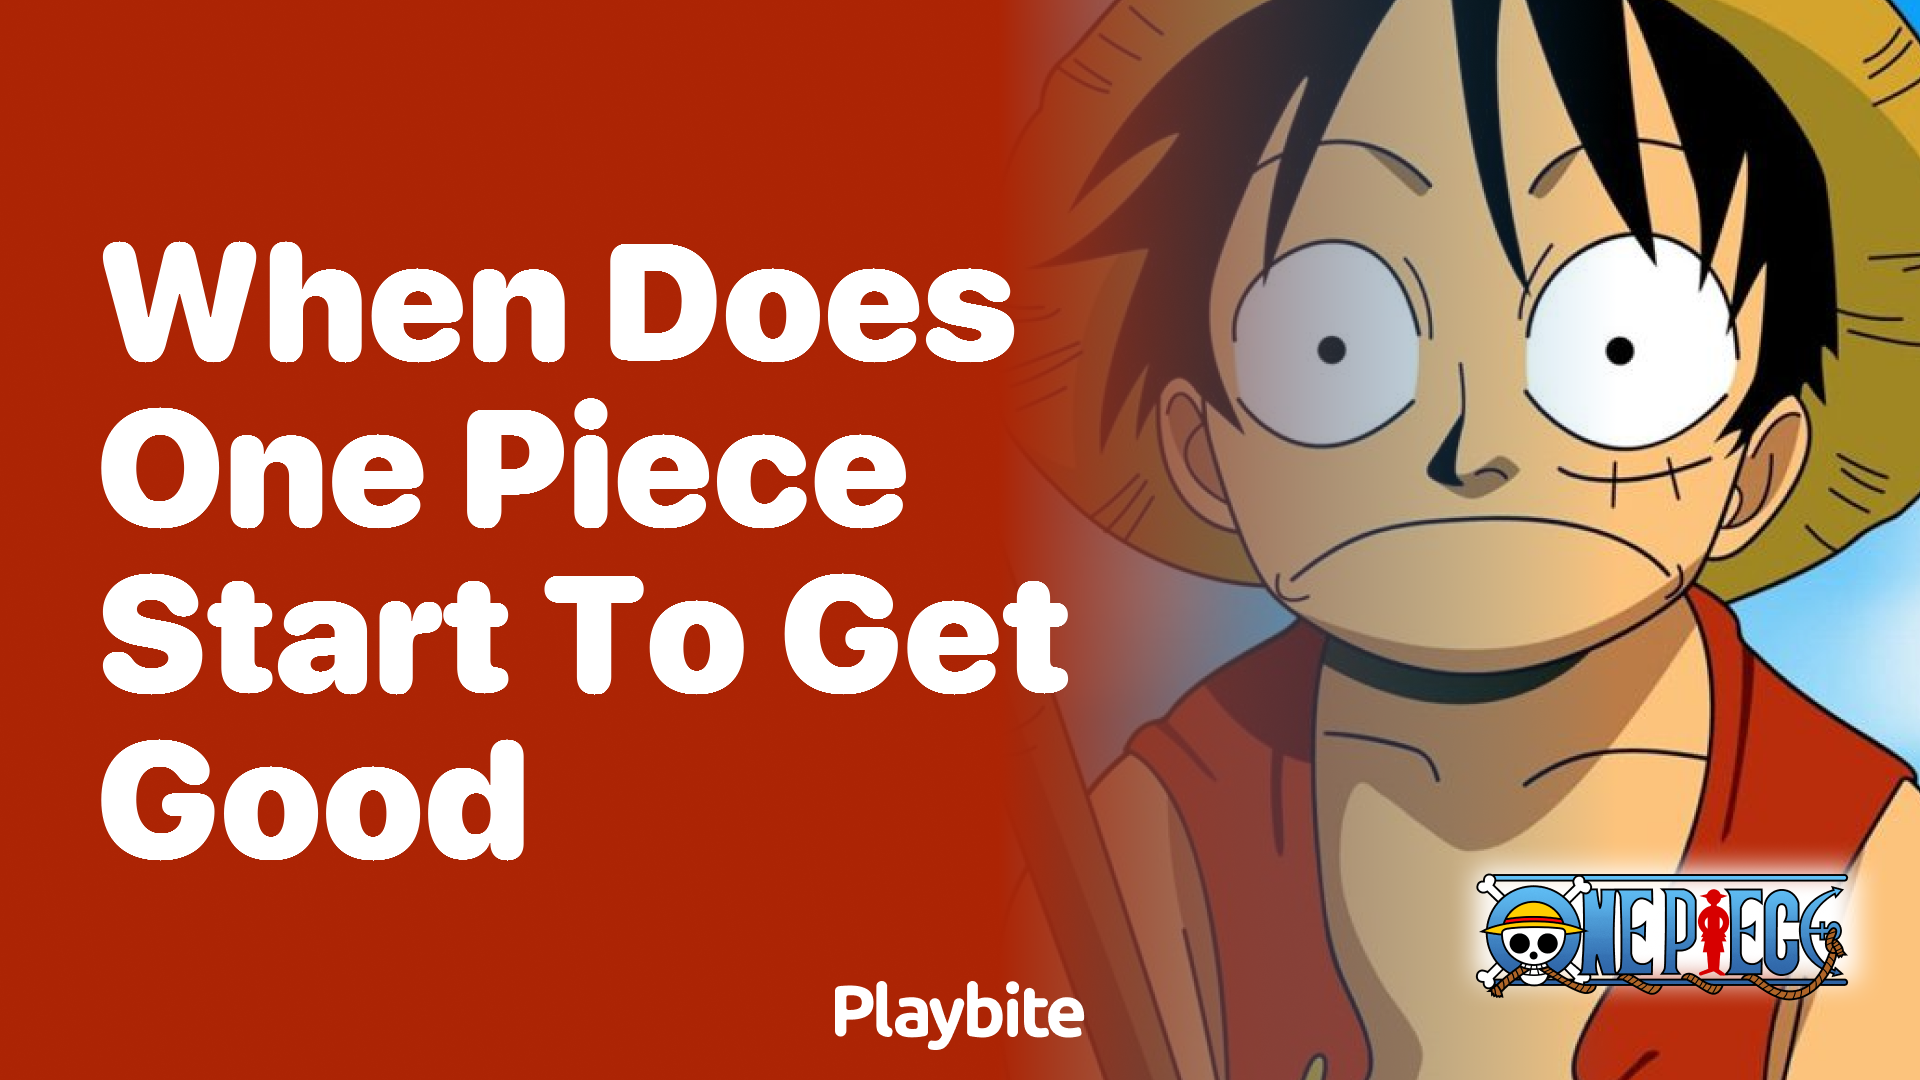 When does One Piece start to get good?